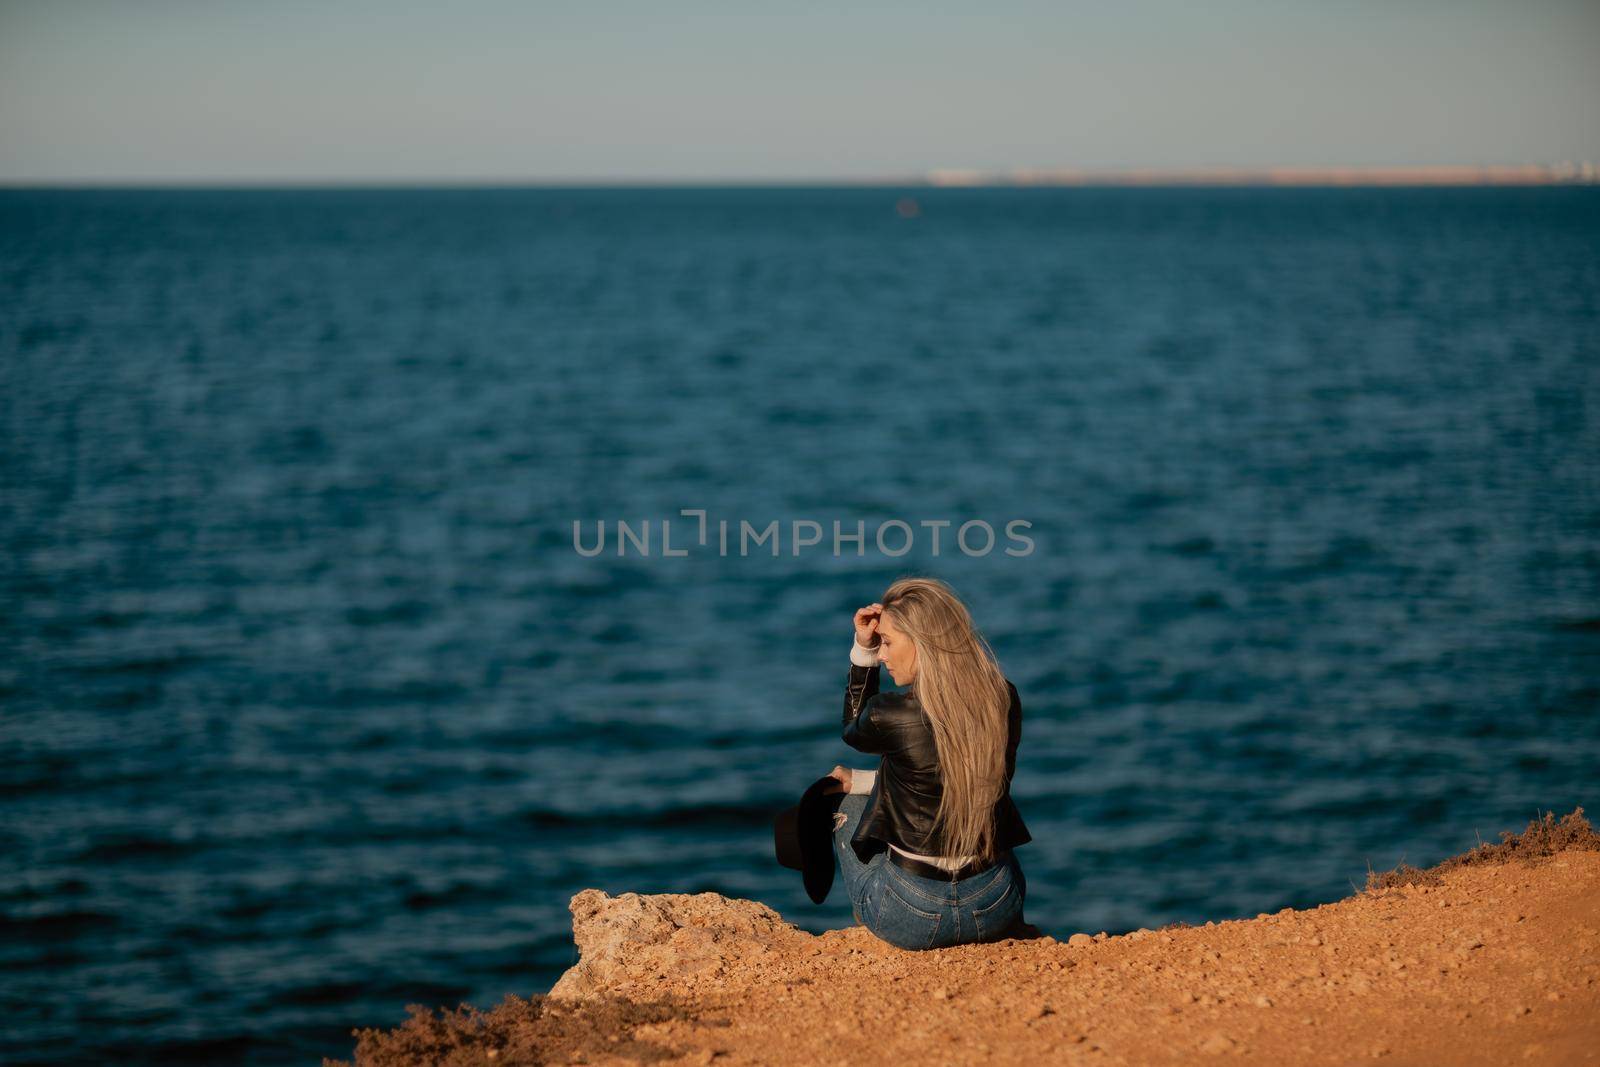 A blonde girl in a stylish black leather jacket is sitting with her back to the seashore